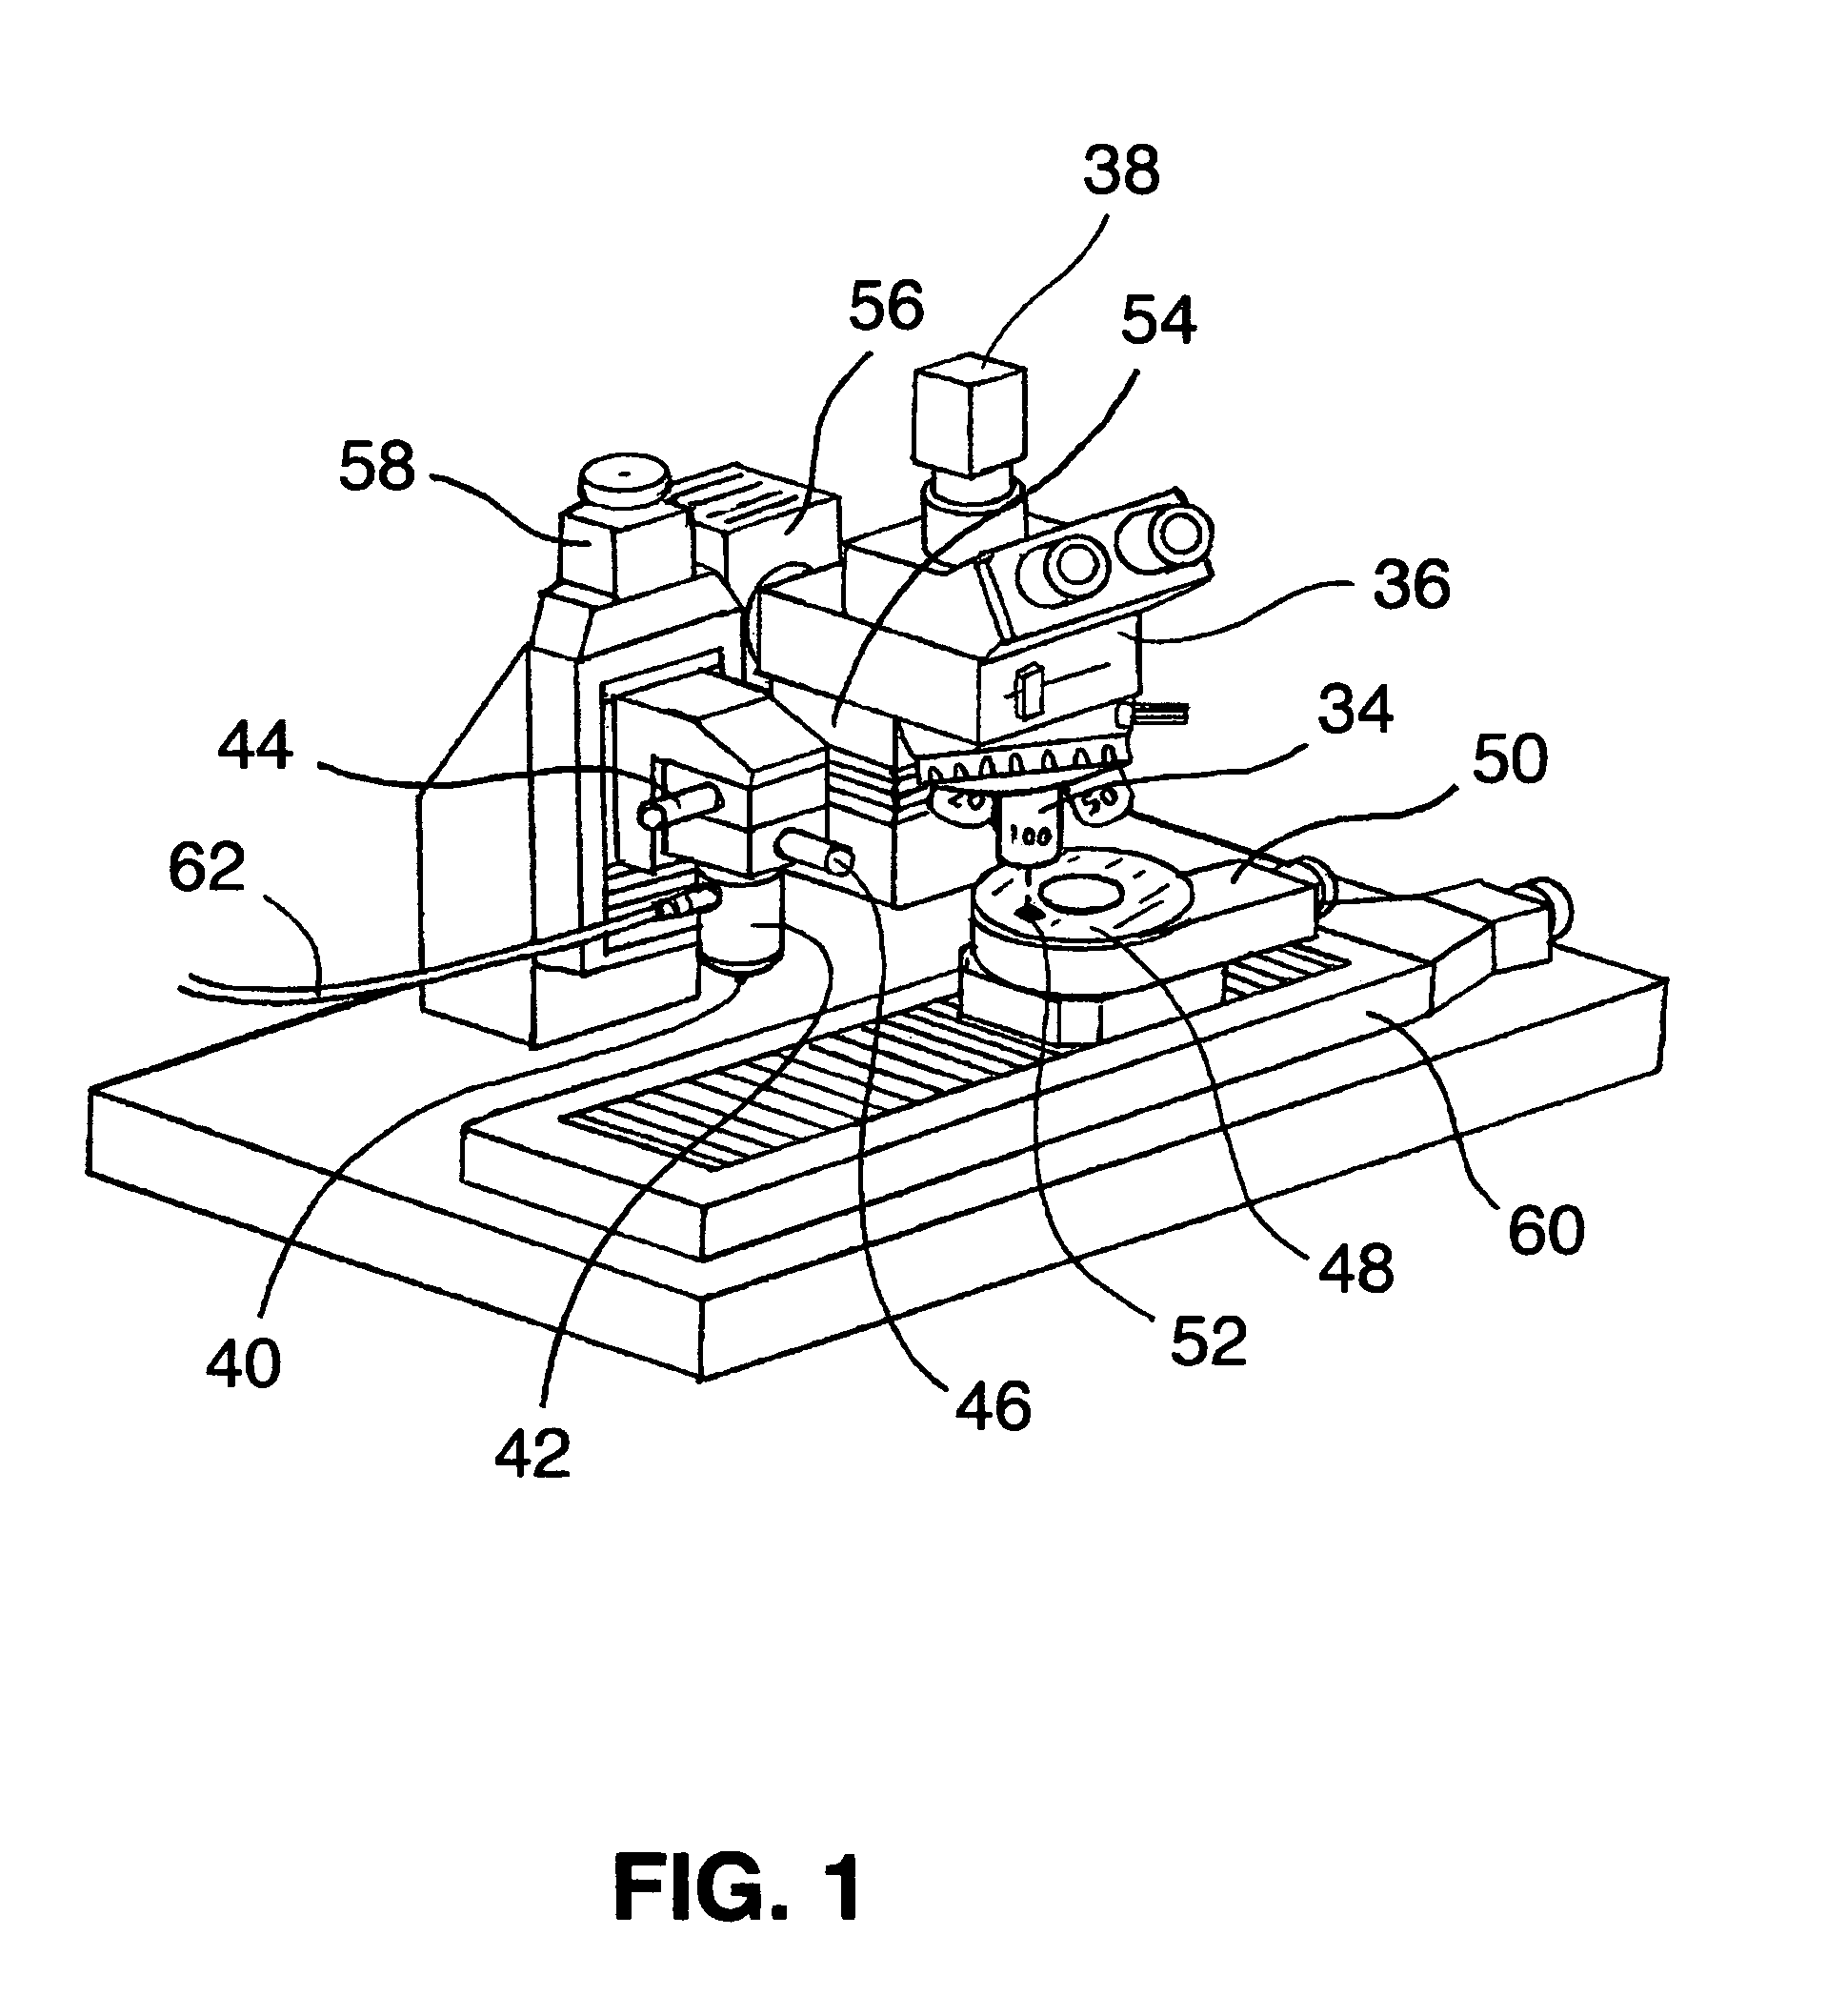 Probe alignment tool for the scanning probe microscope